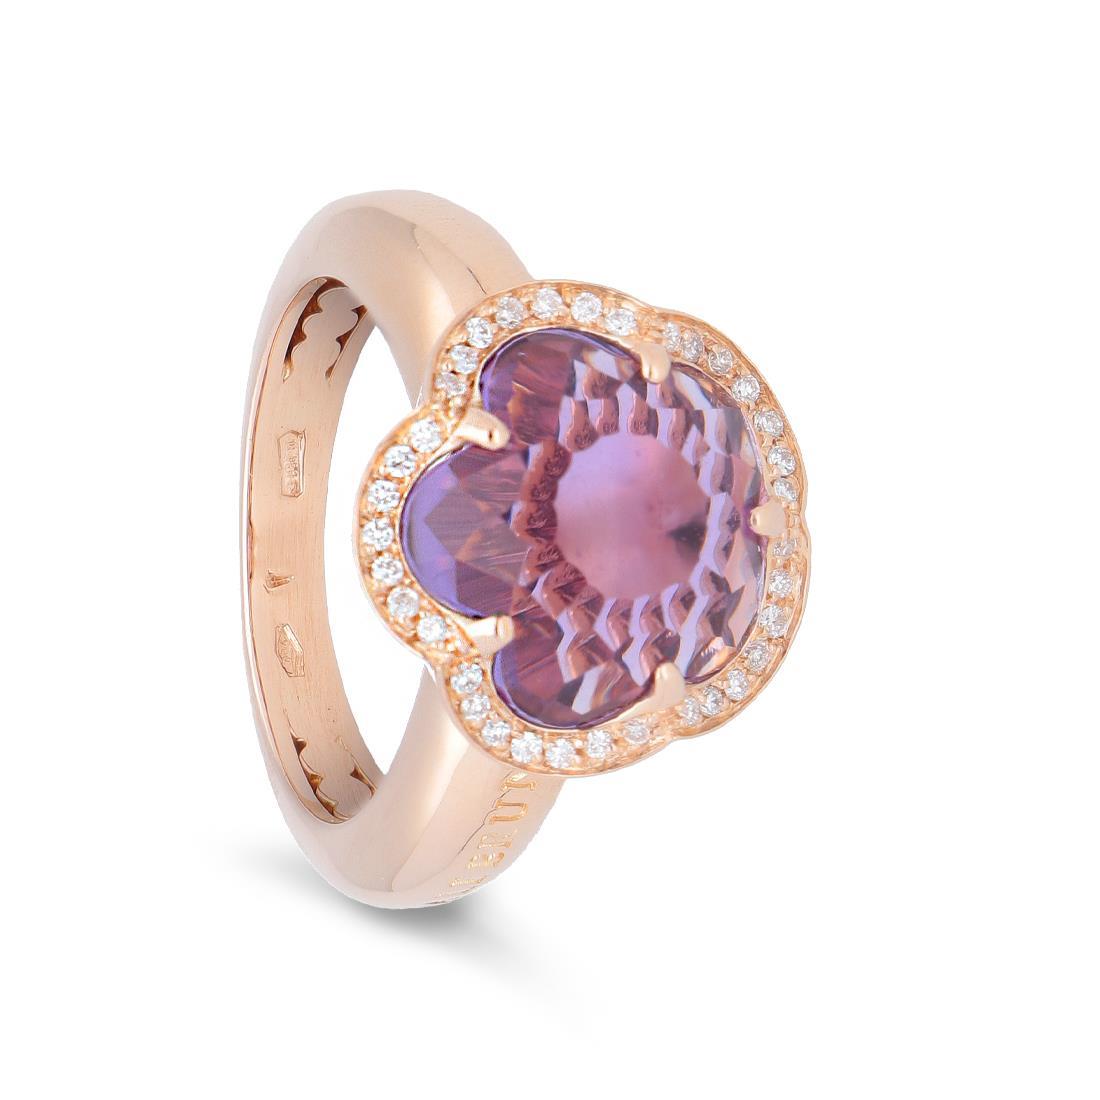 Bon Ton flower ring in red gold with amethyst and diamonds - PASQUALE BRUNI